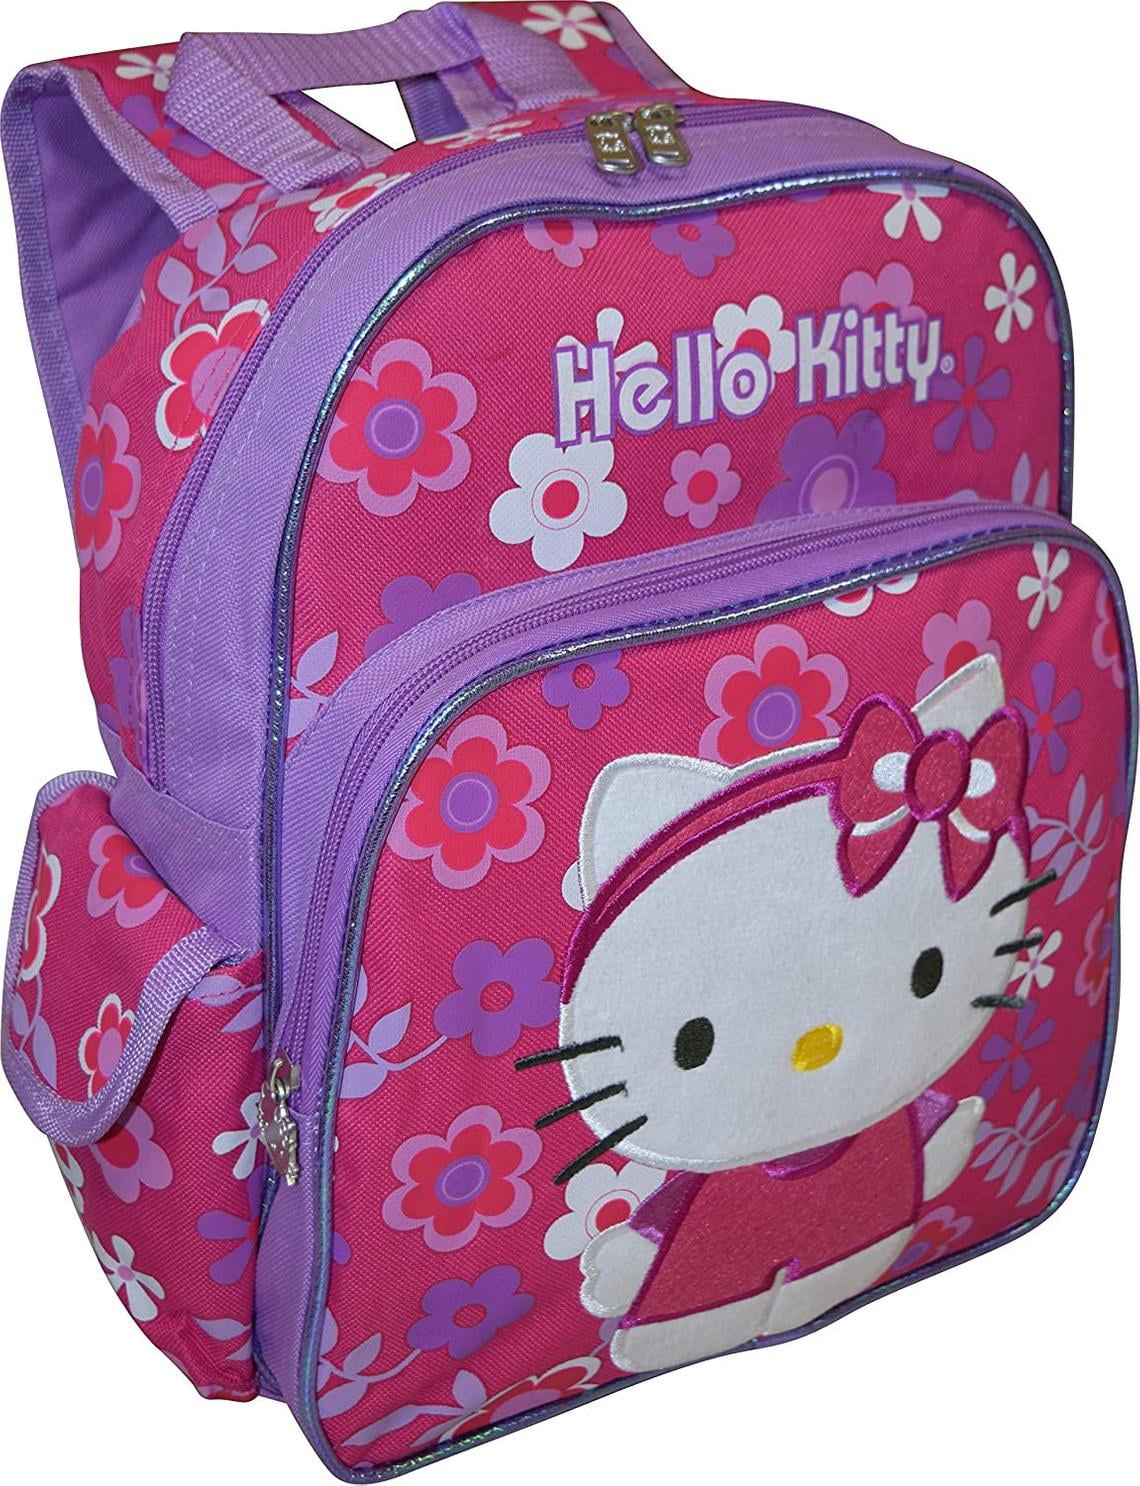 Hello Kitty 12 inch Backpack Flower Shop Deluxe Embroidered School Bag